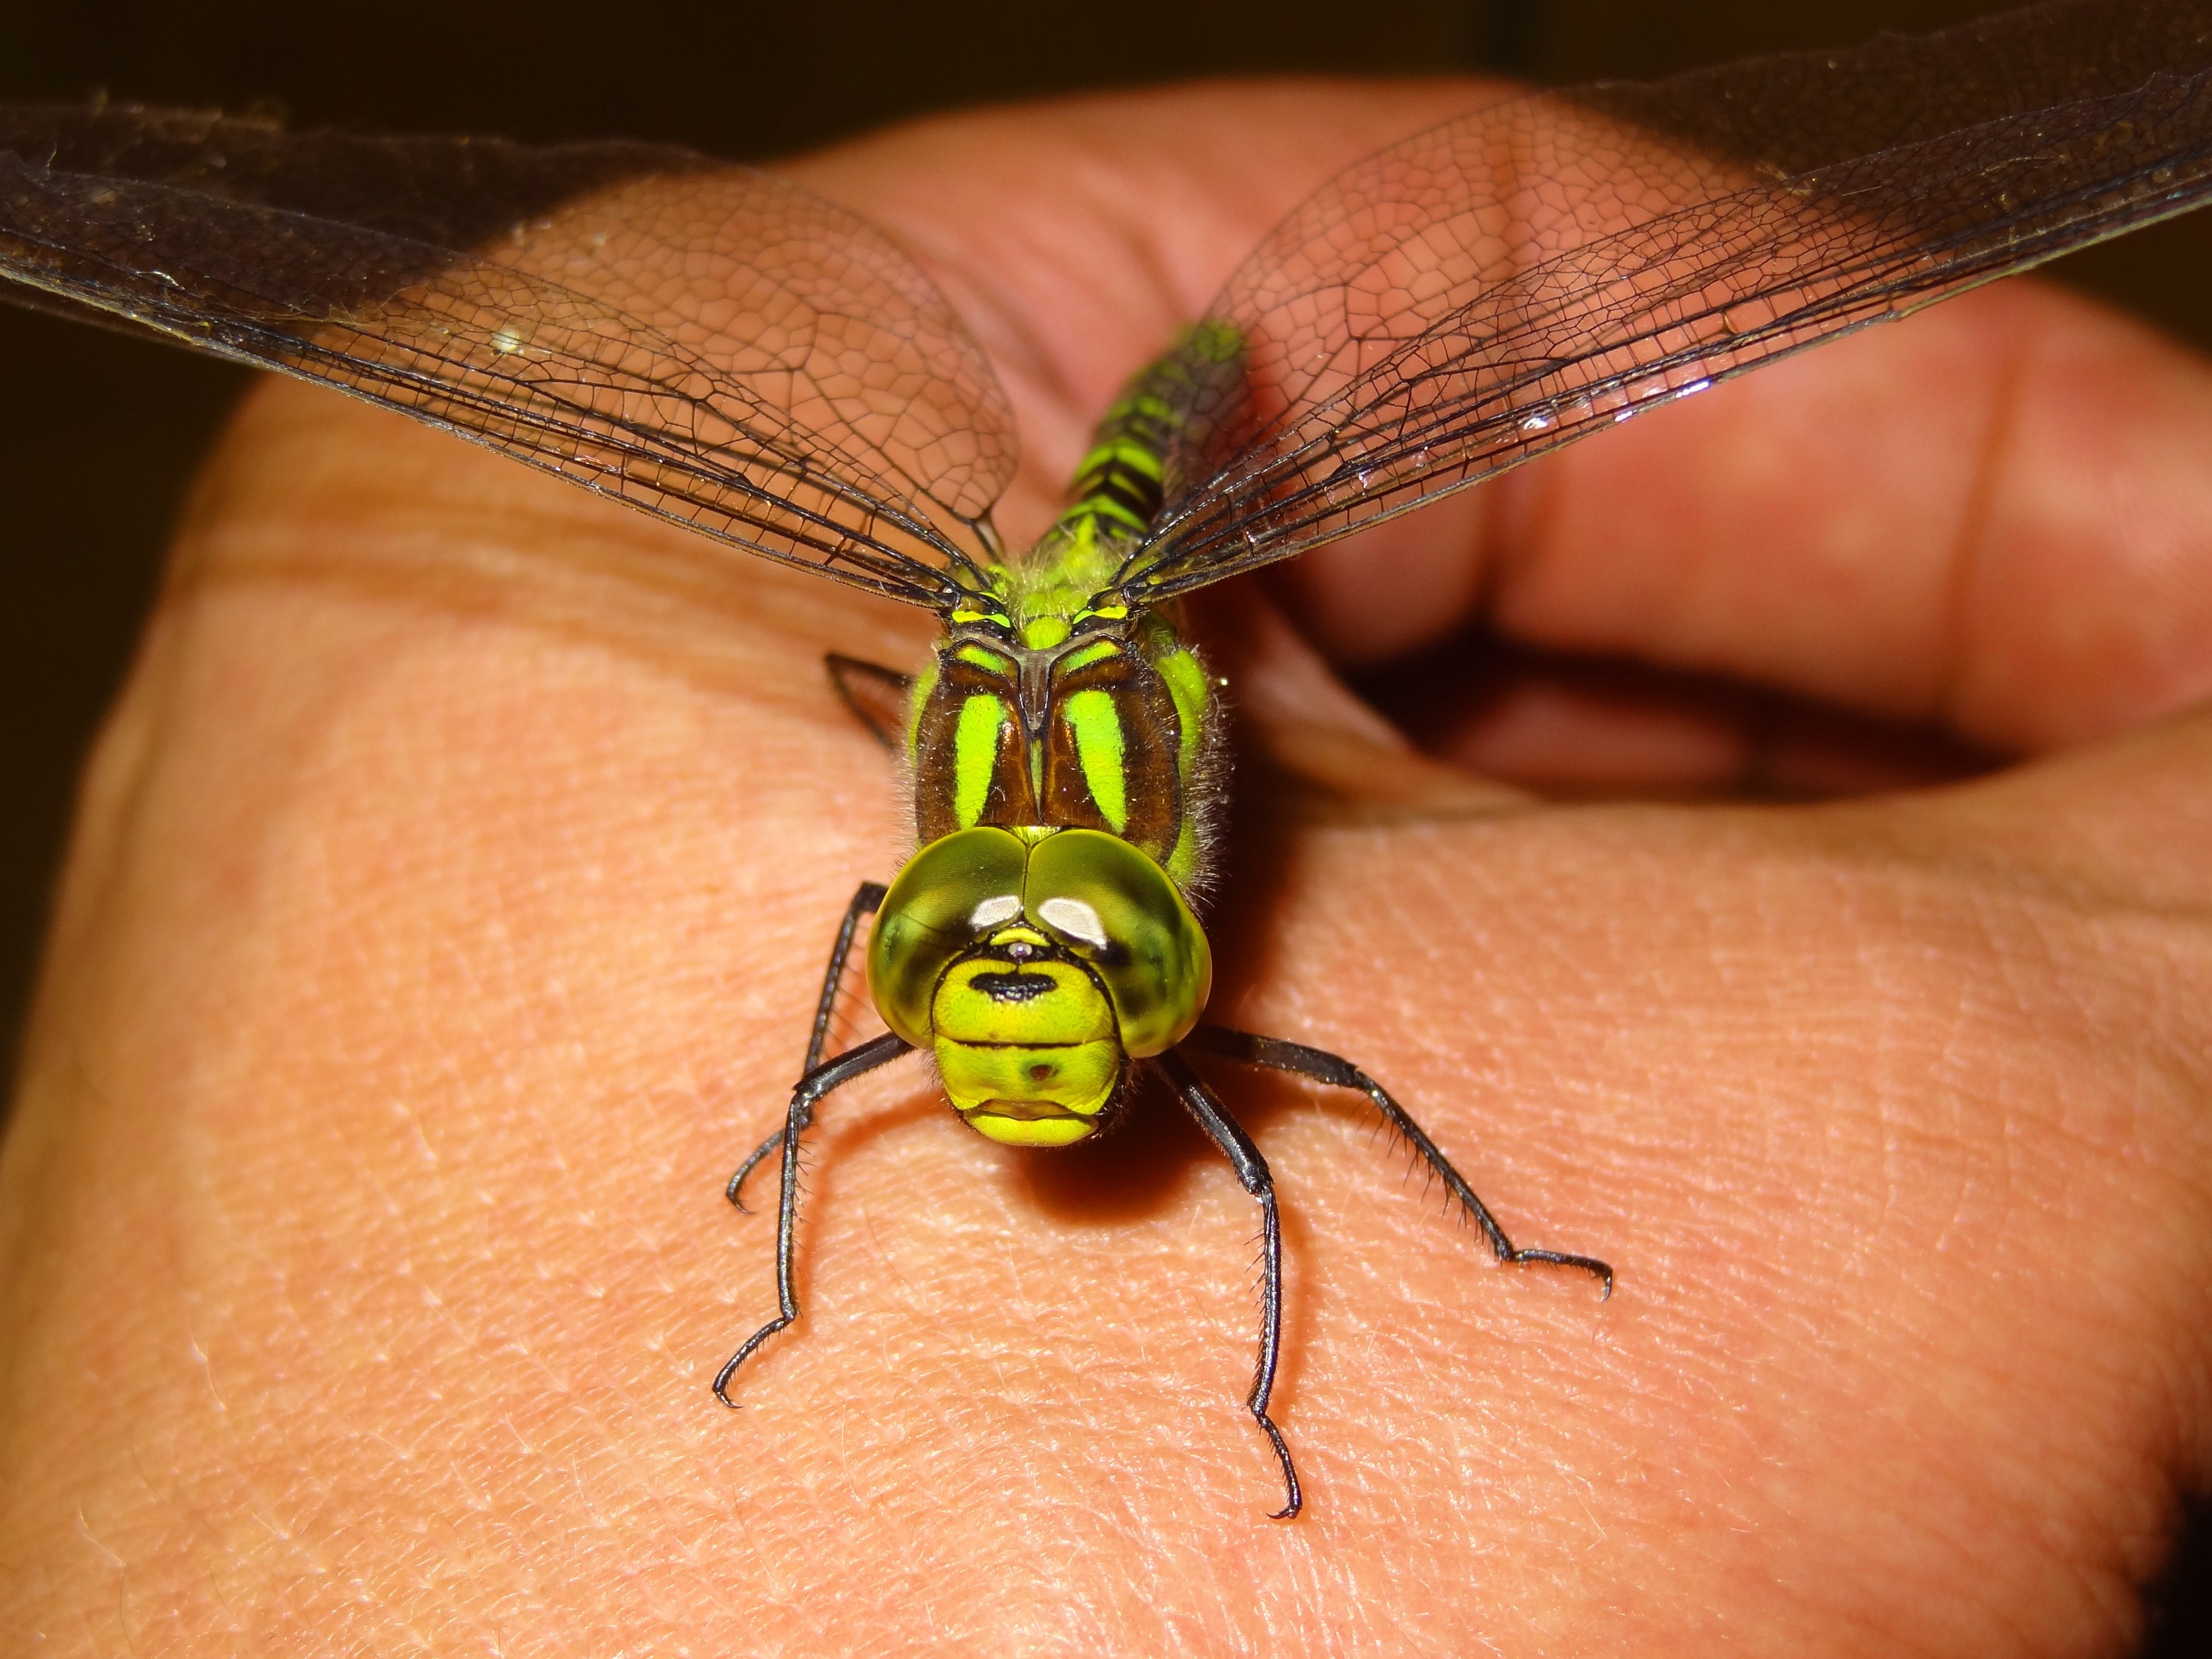 macro short photograph of green dragon fly perched on person's hand